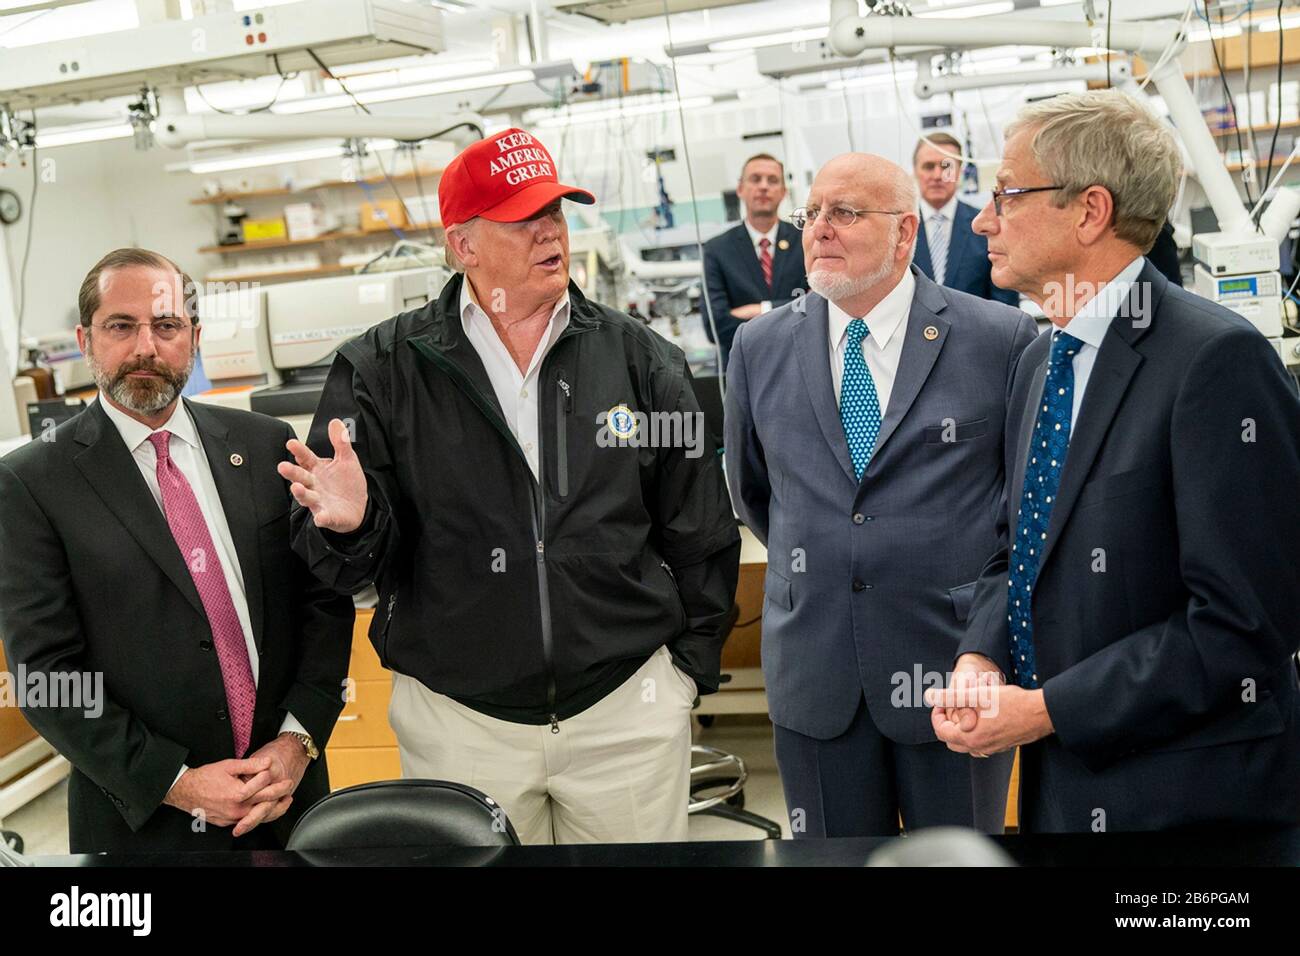 U.S President Donald Trump joined by the Secretary of Health and Human Services Alex Azar, left, Director of Centers for Disease Control and Prevention Dr. Robert Redfield, and Dr. Stephan Monroe, associate director of the CDC, right, speaks with reporters during a visit to the Centers for Disease Control and Prevention March 6, 2020 in Atlanta, Georgia. Stock Photo